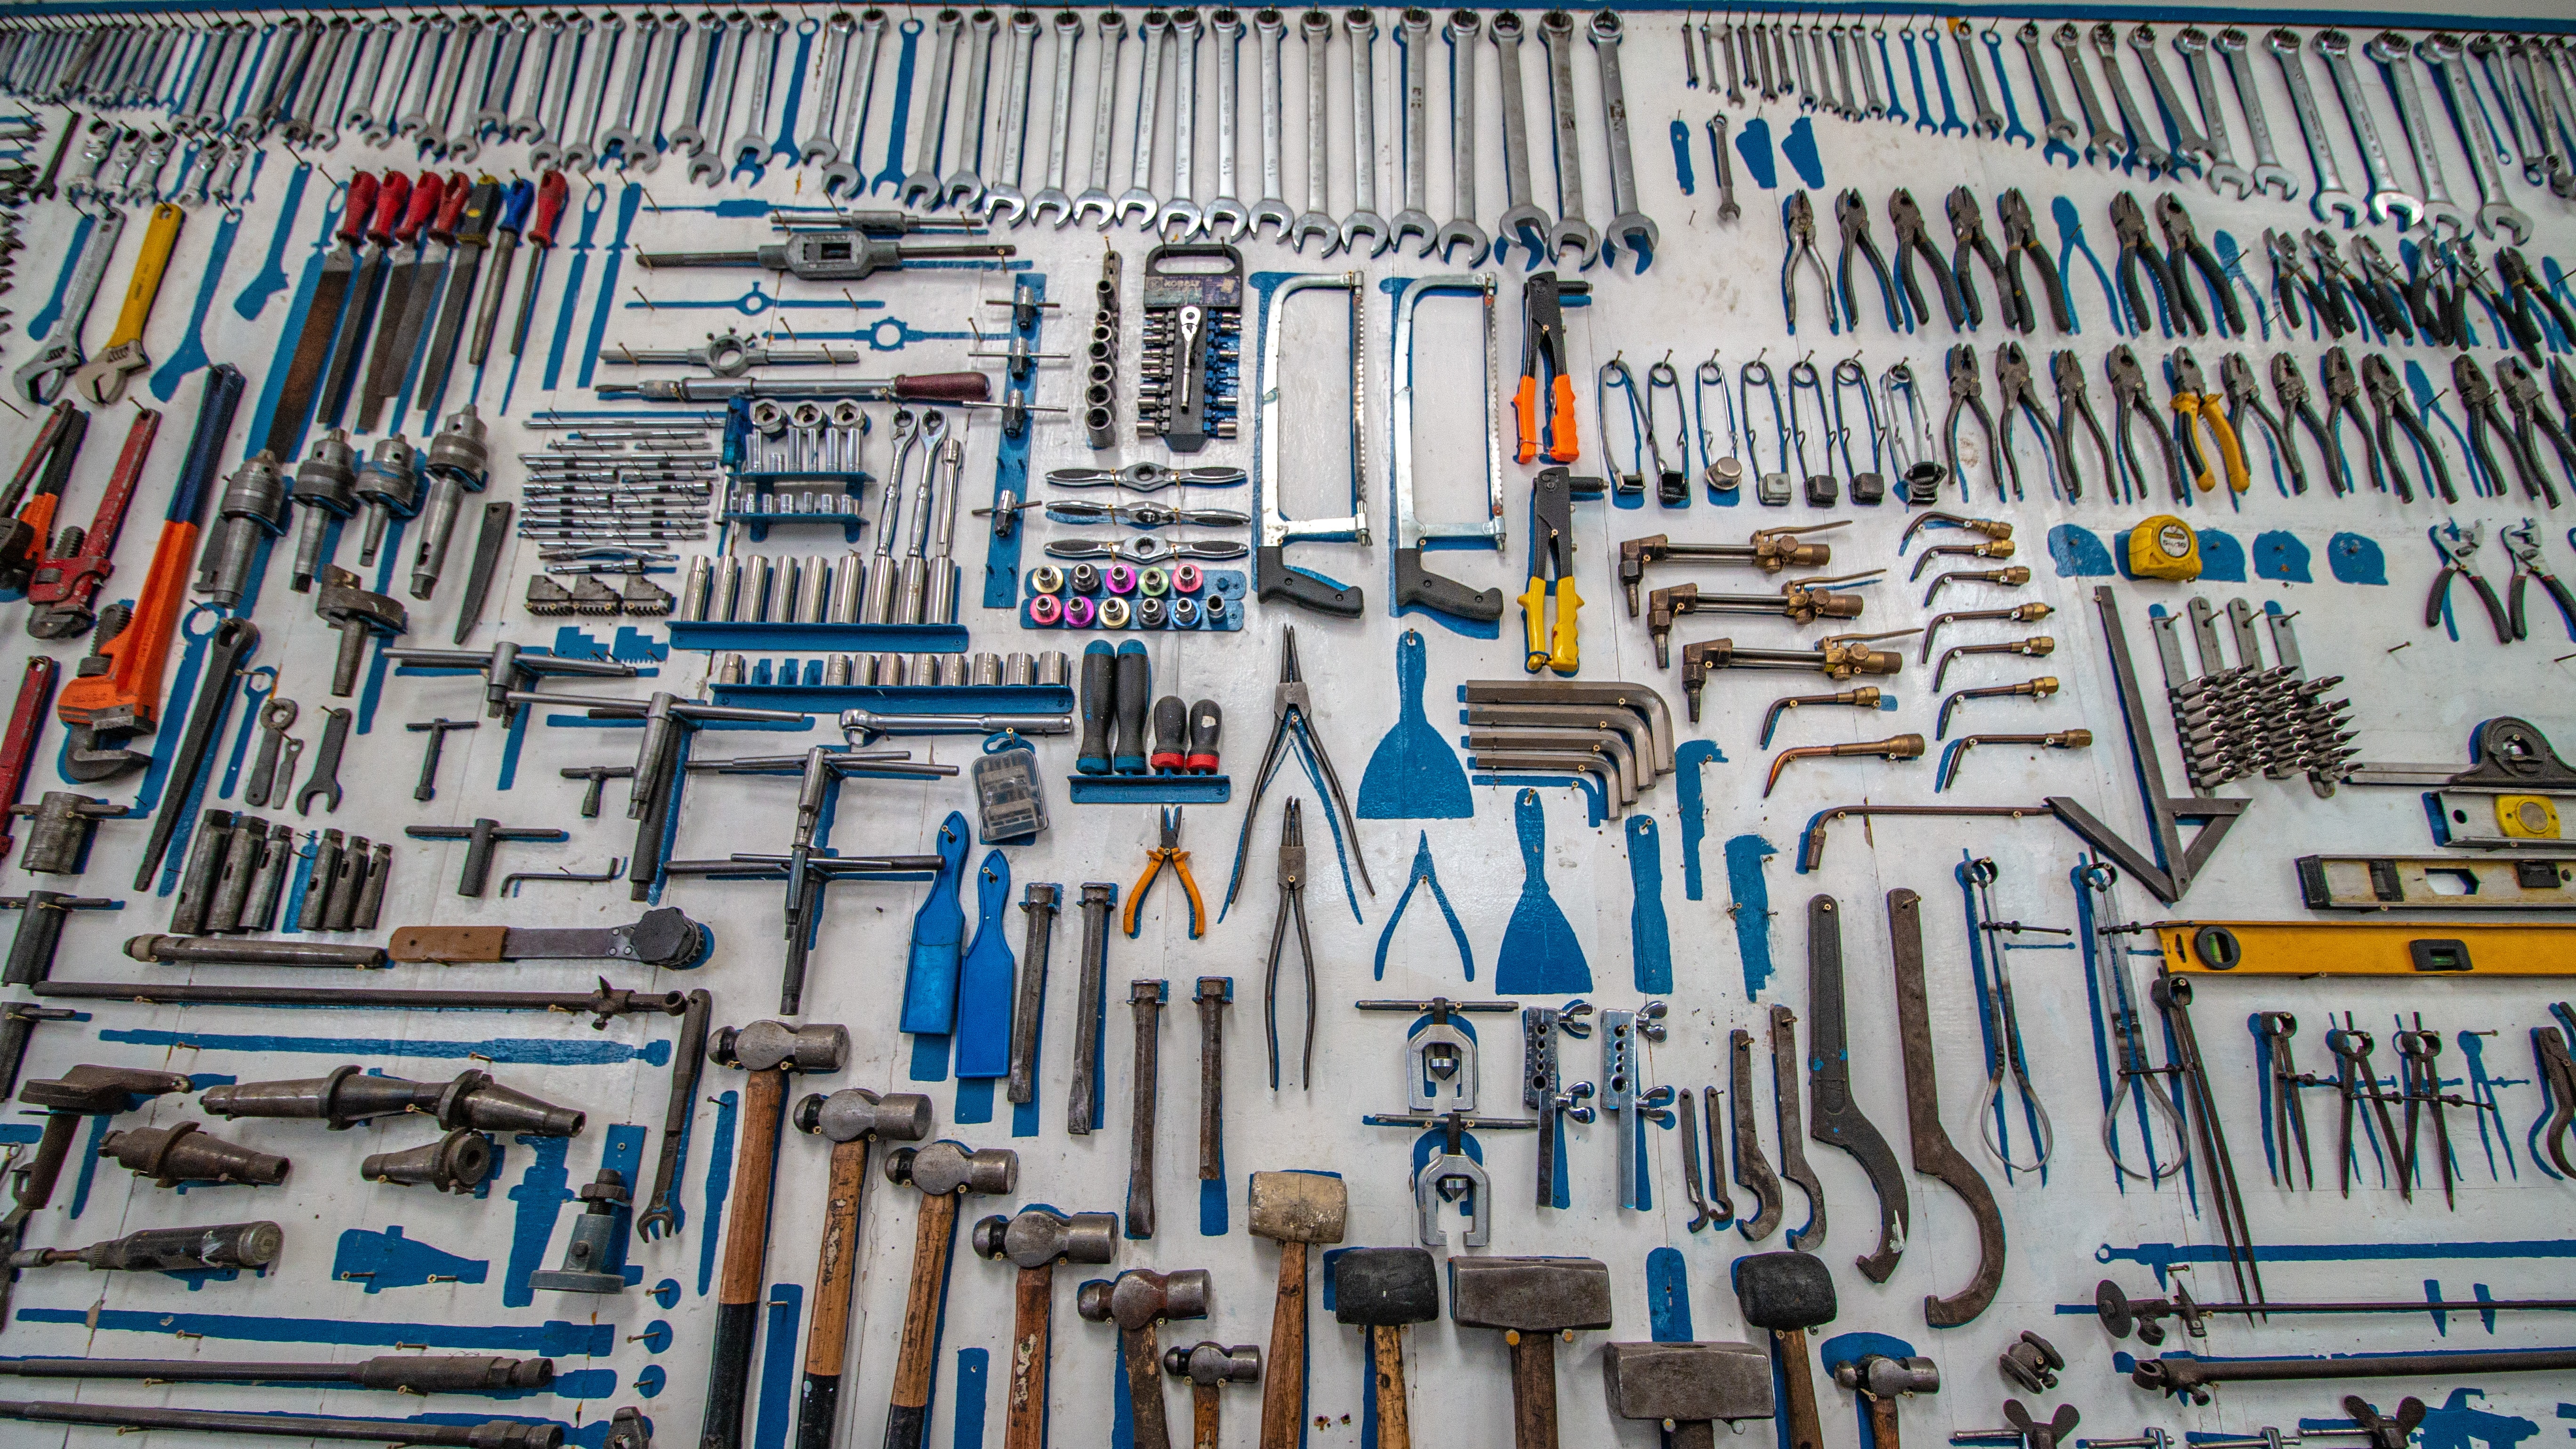 Handheld tools spread out on a table. Photo by Cesar Carlevarino Aragon on Unsplash